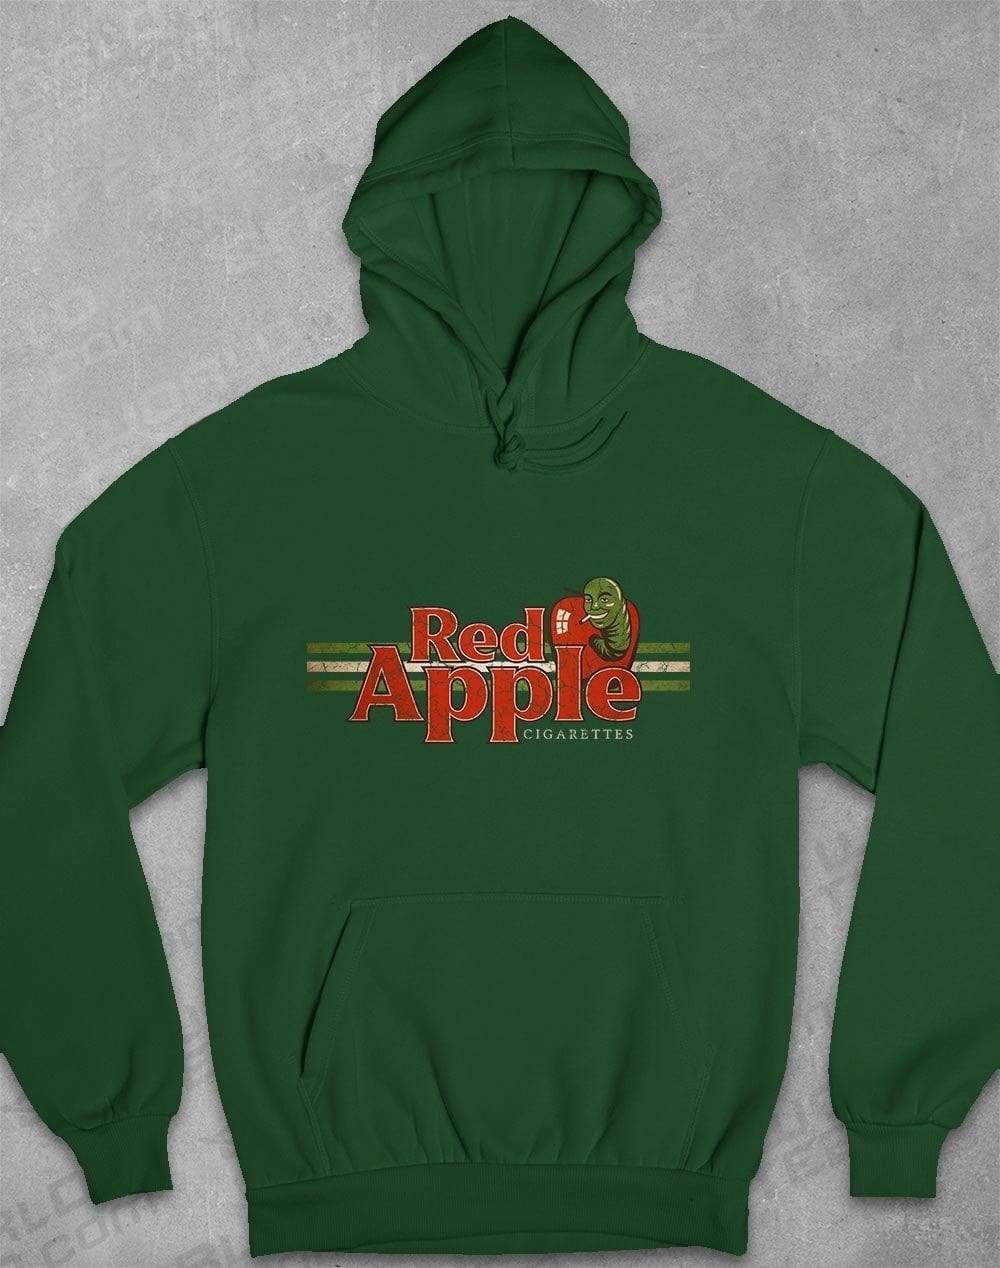 Red Apple Cigarettes Hoodie S / Bottle Green  - Off World Tees